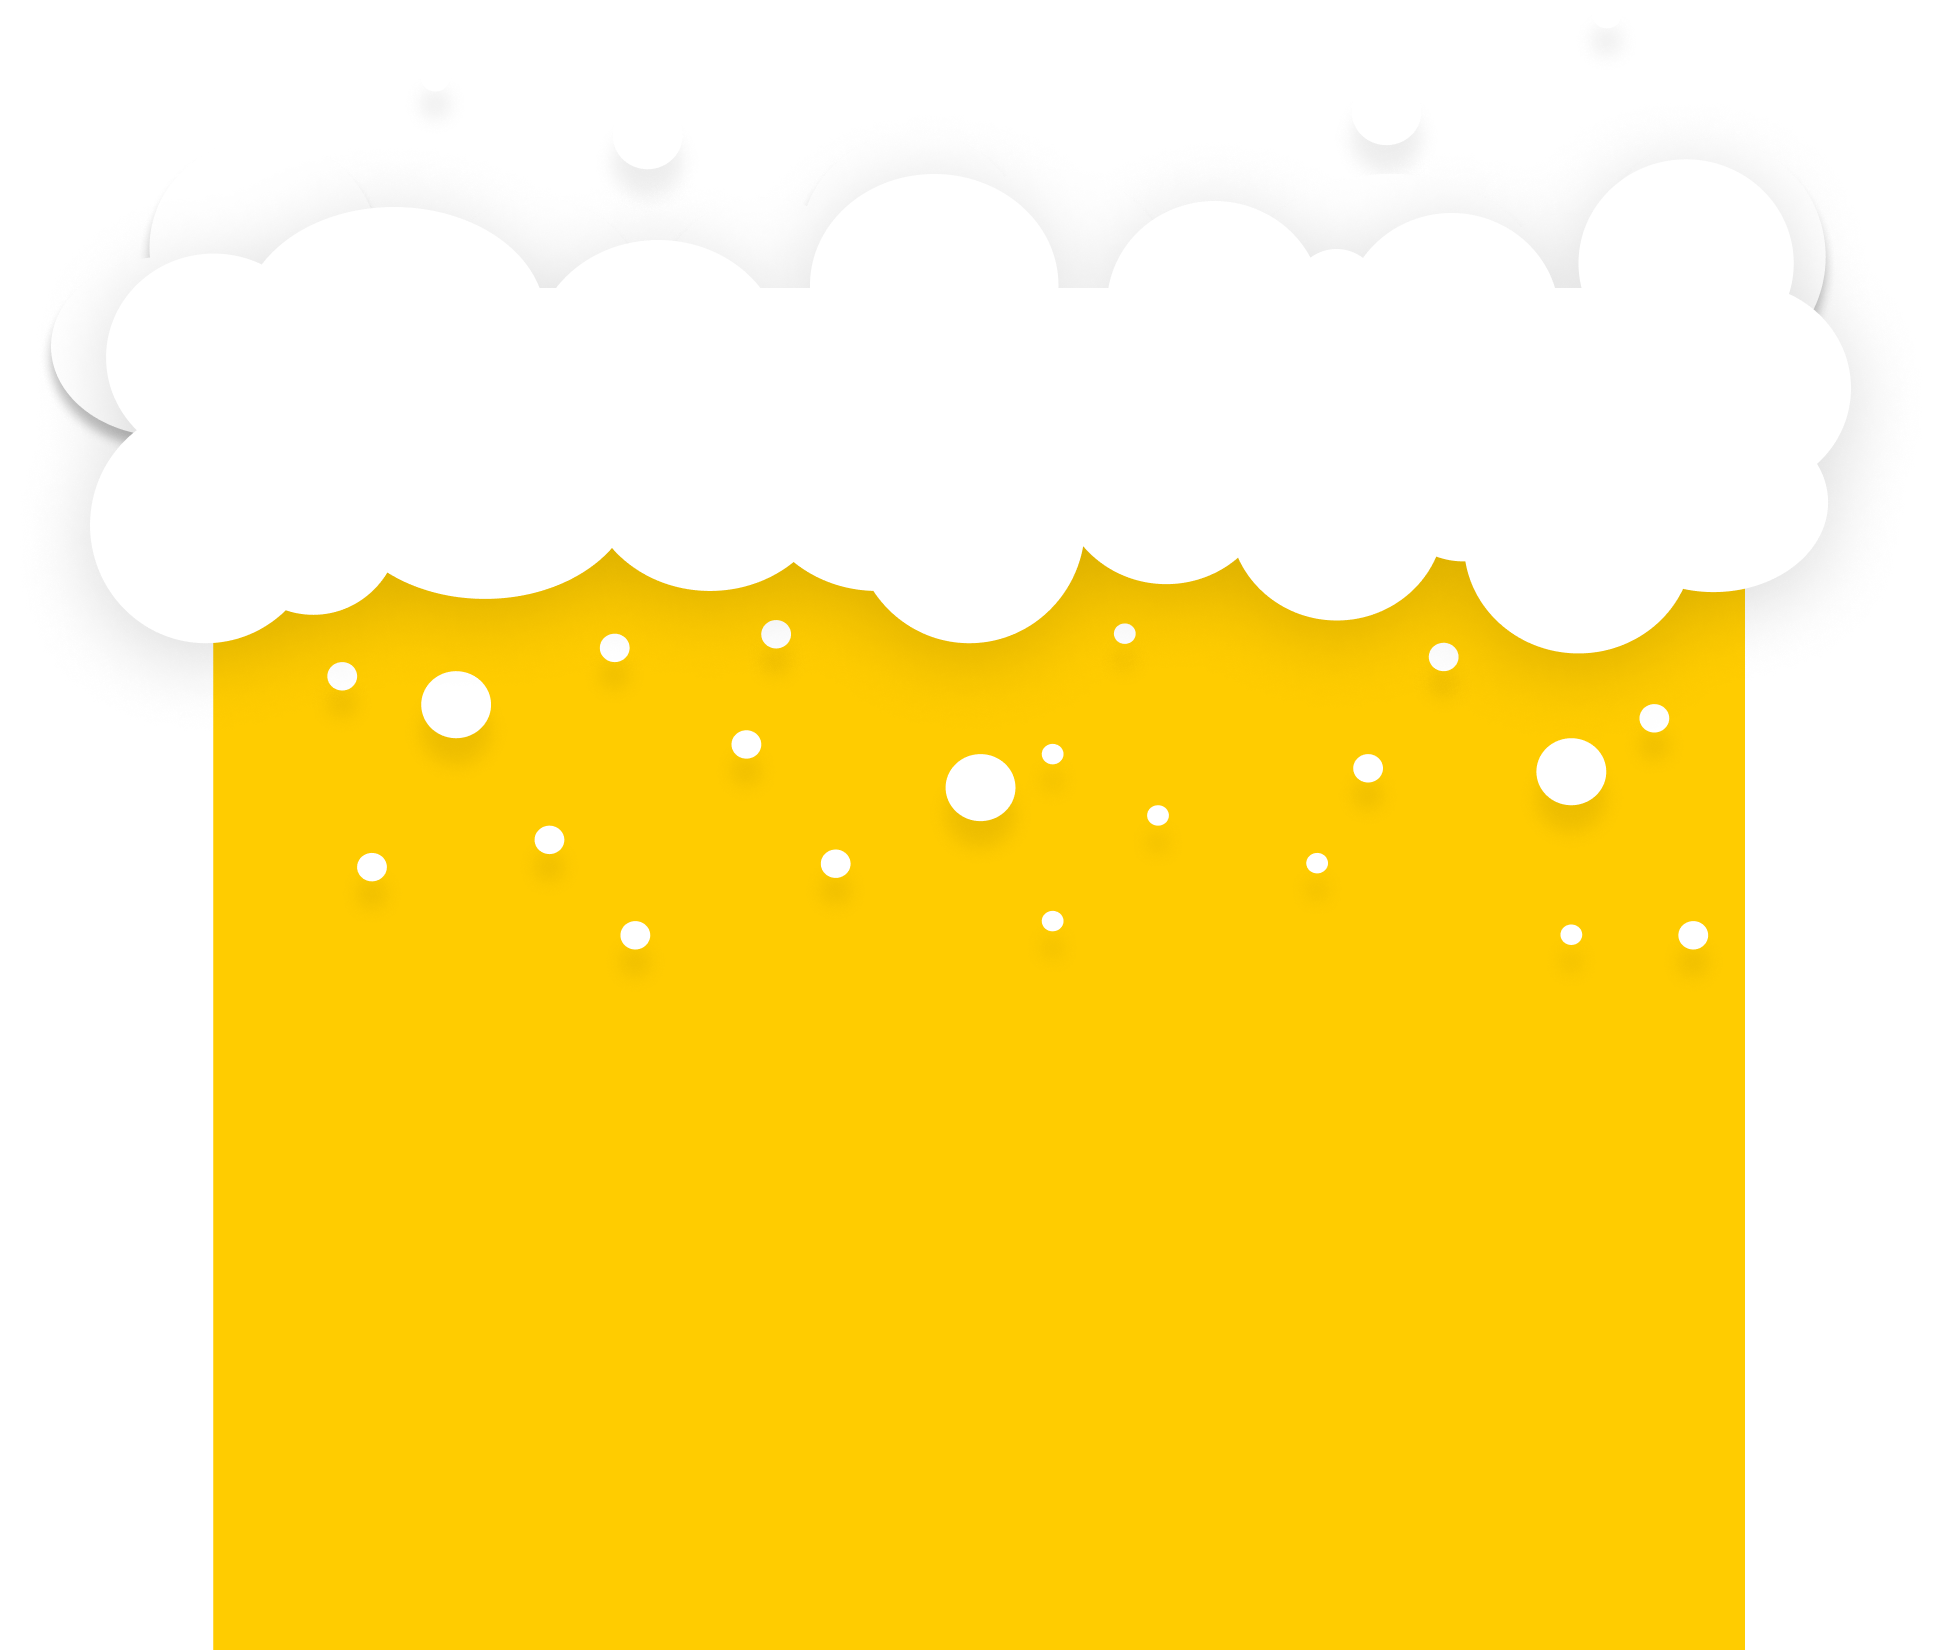 An image of a beer with foam in the background